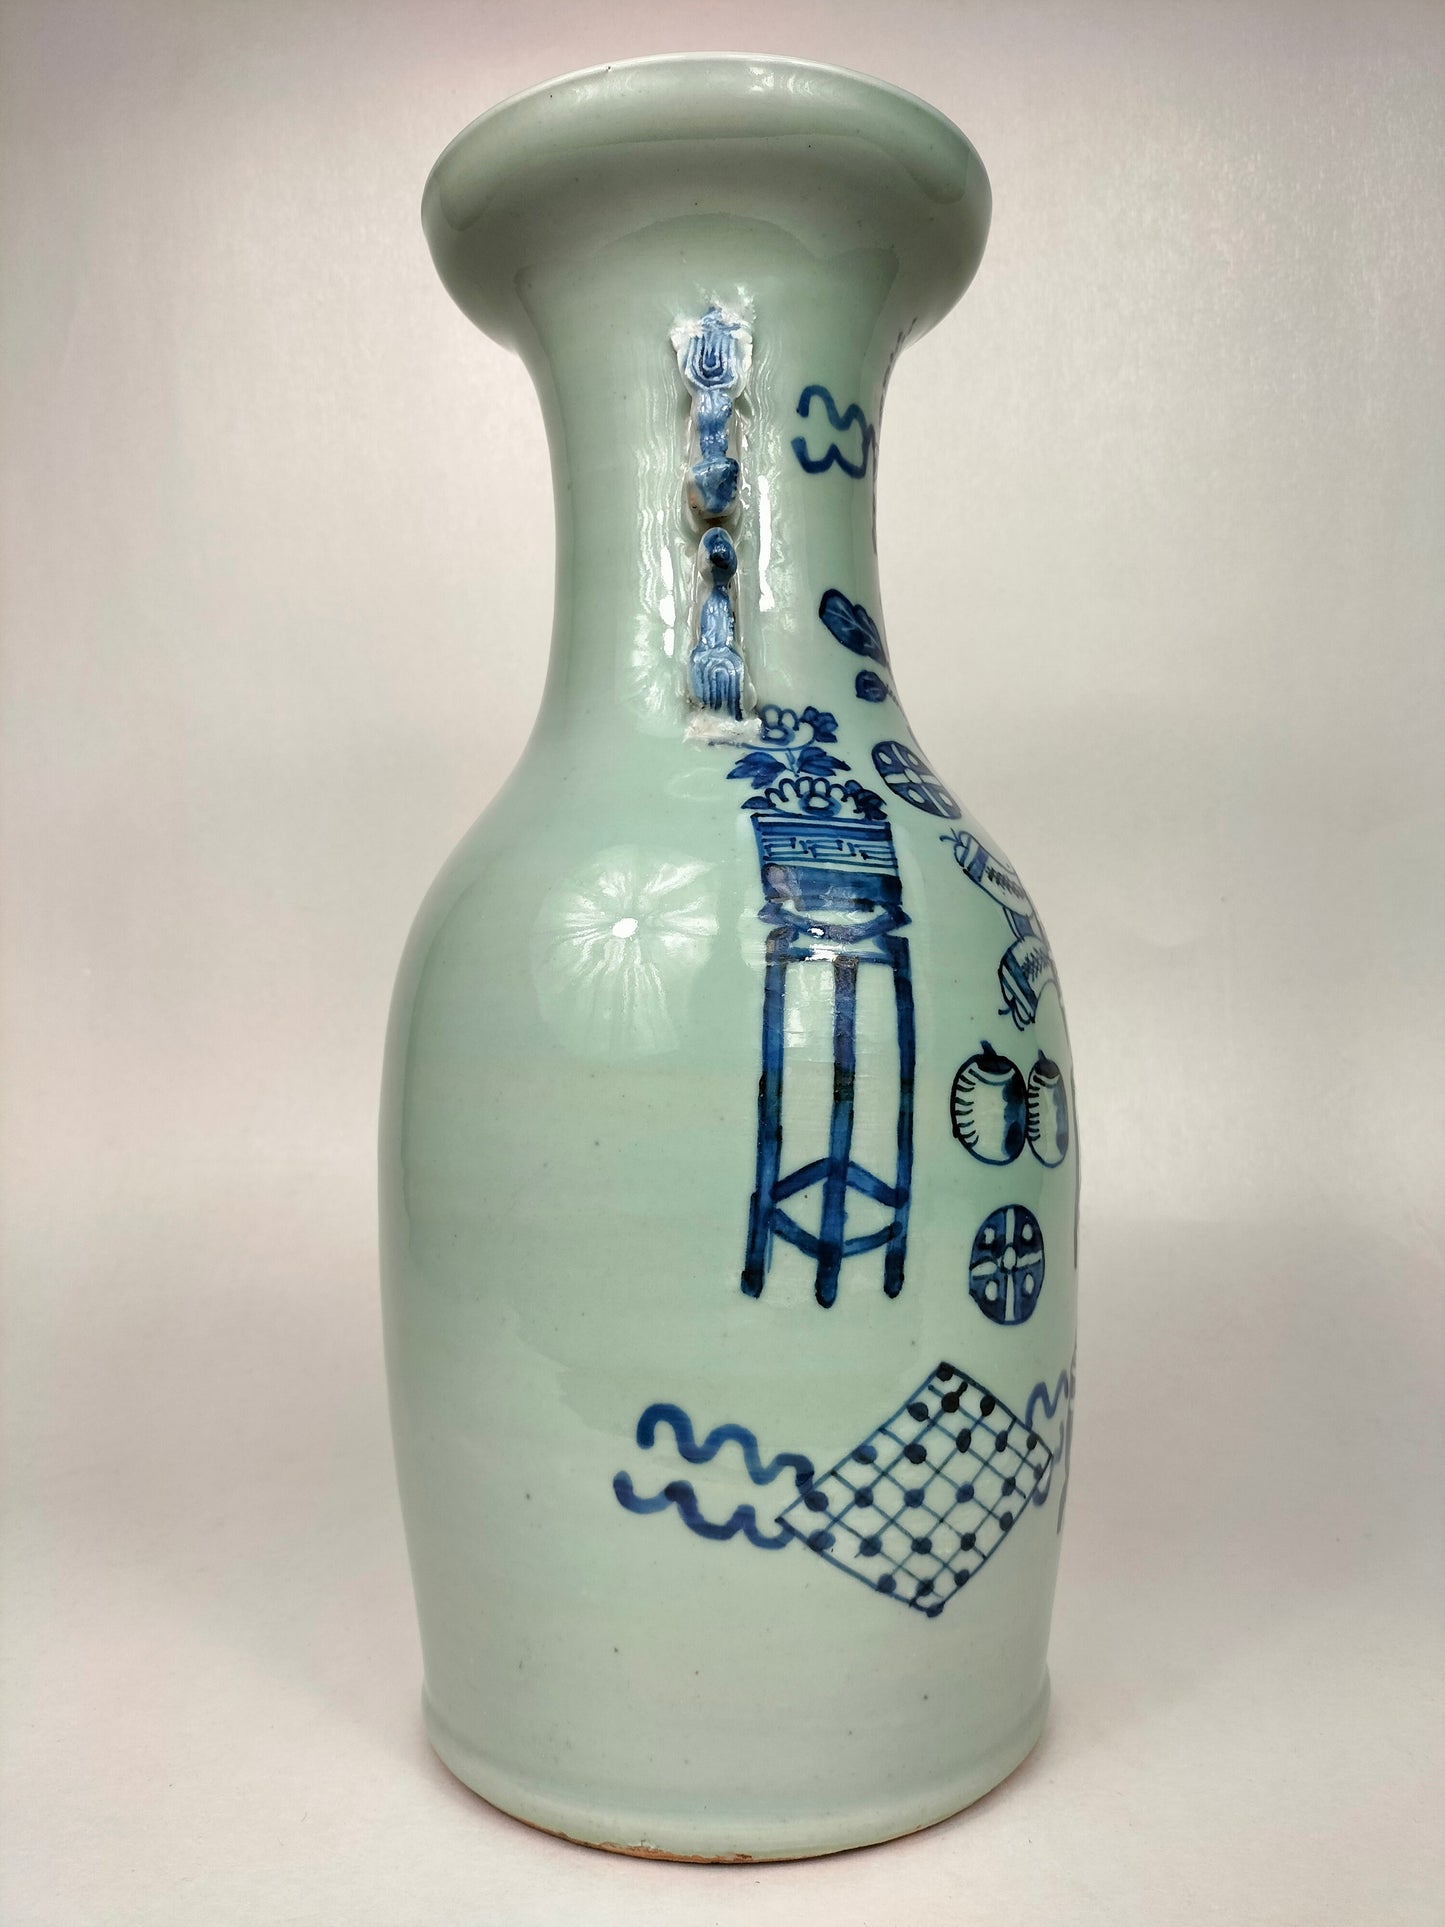 Antique Chinese celadon vase decorated with antiquities // Qing Dynasty - 19th century